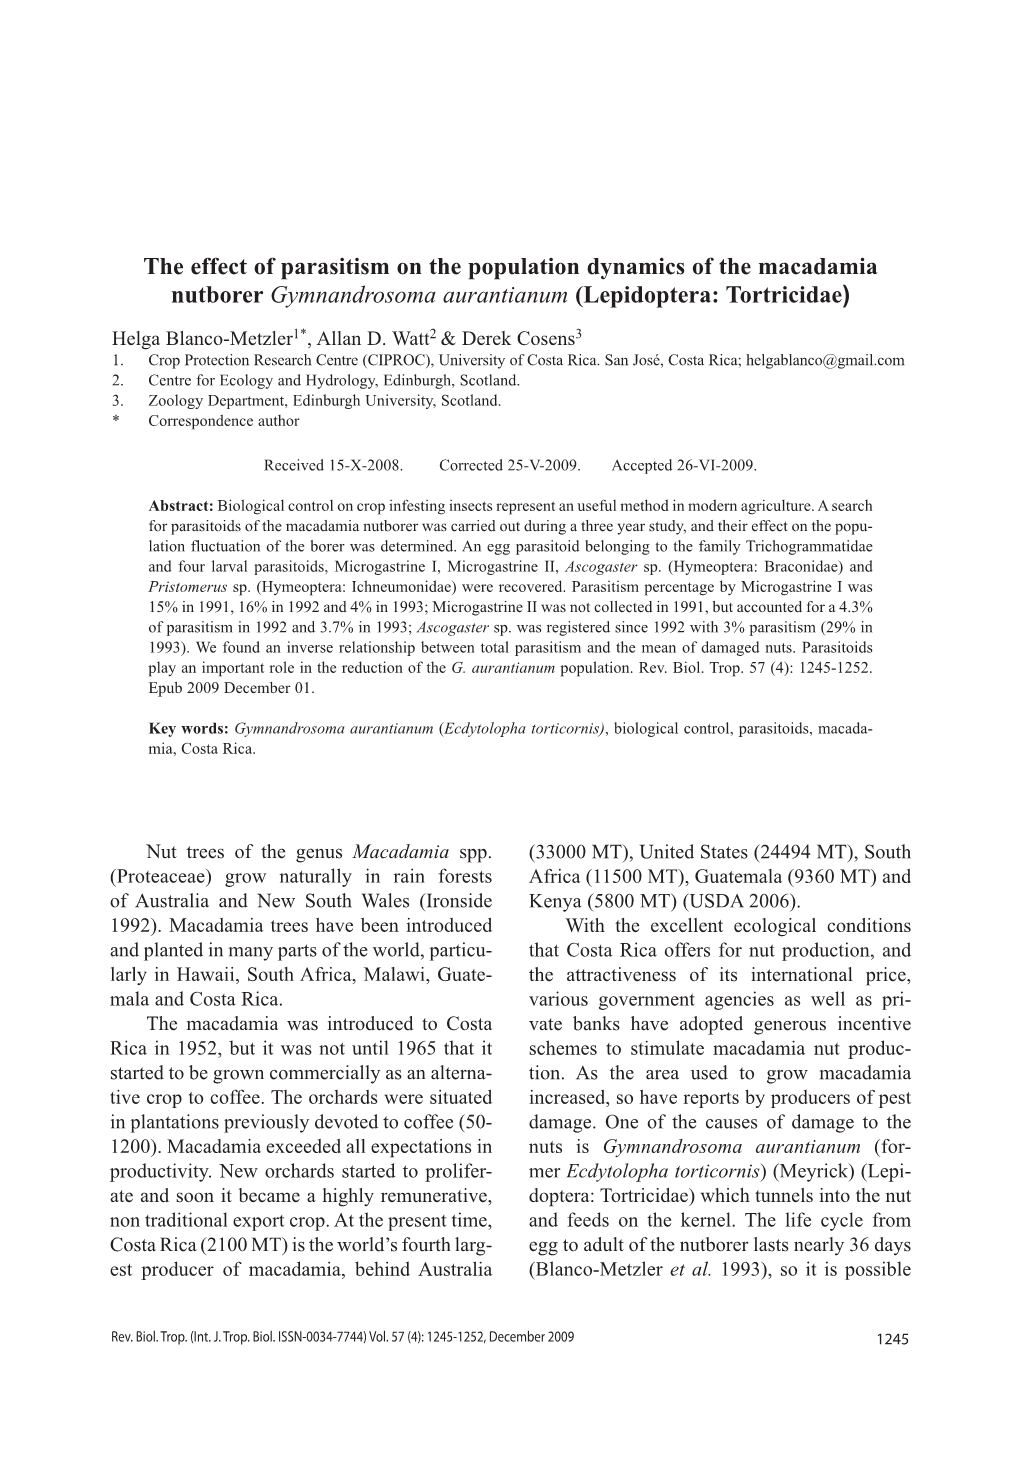 The Effect of Parasitism on the Population Dynamics of the Macadamia Nutborer Gymnandrosoma Aurantianum (Lepidoptera: Tortricidae)